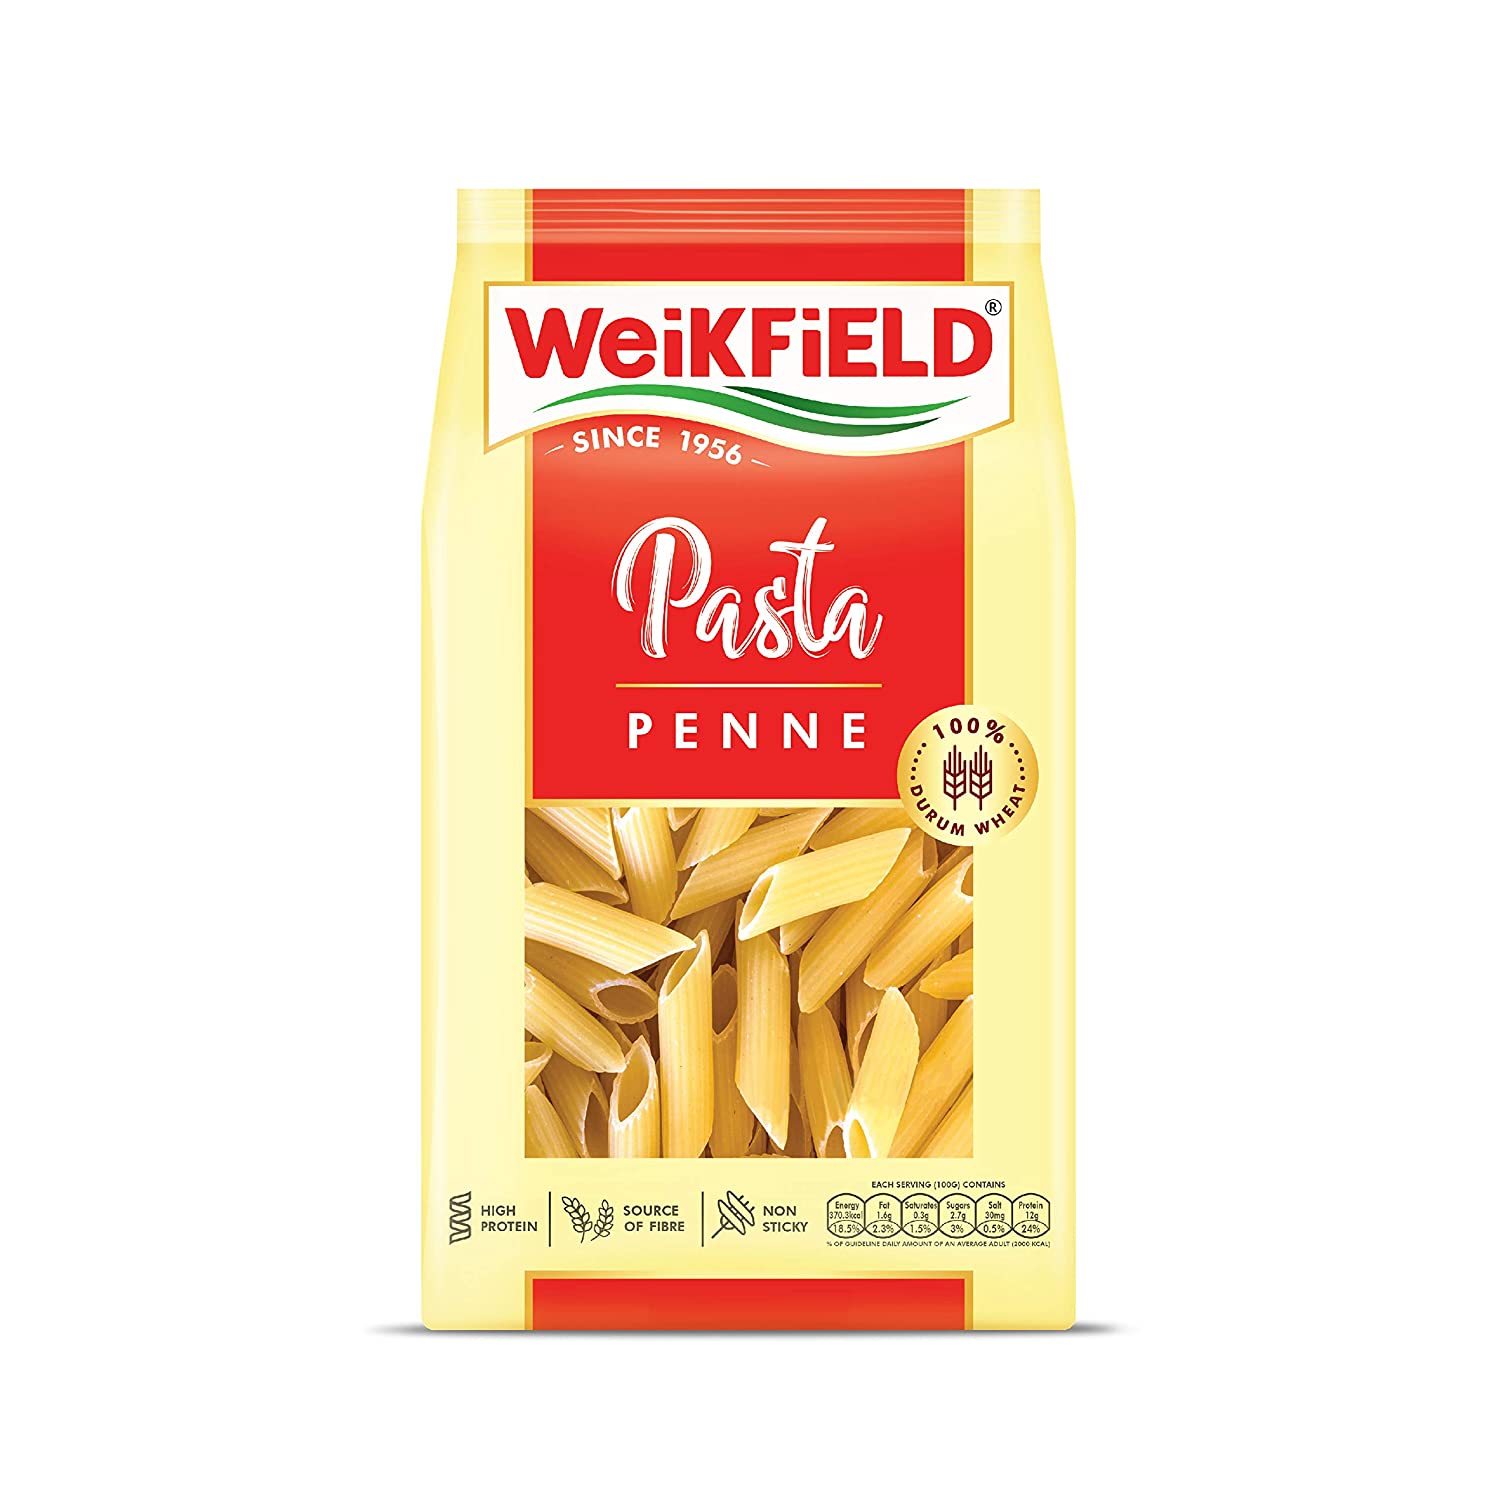 Weikfield Penne Pasta Image